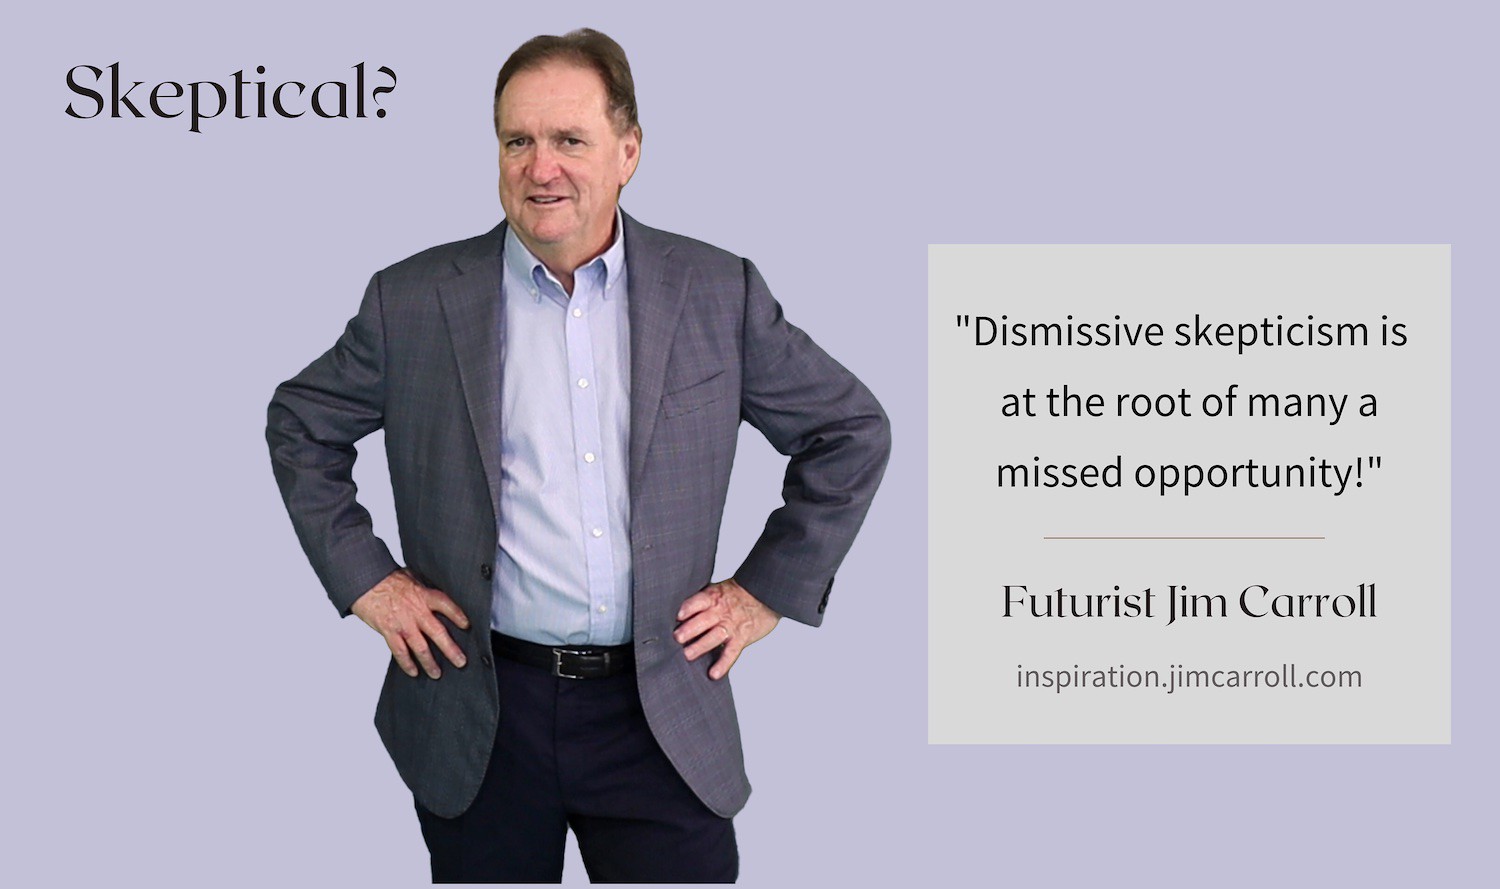 "Dismissive skepticism is at the root of many a missed opportunity!" - Futurist Jim Carroll